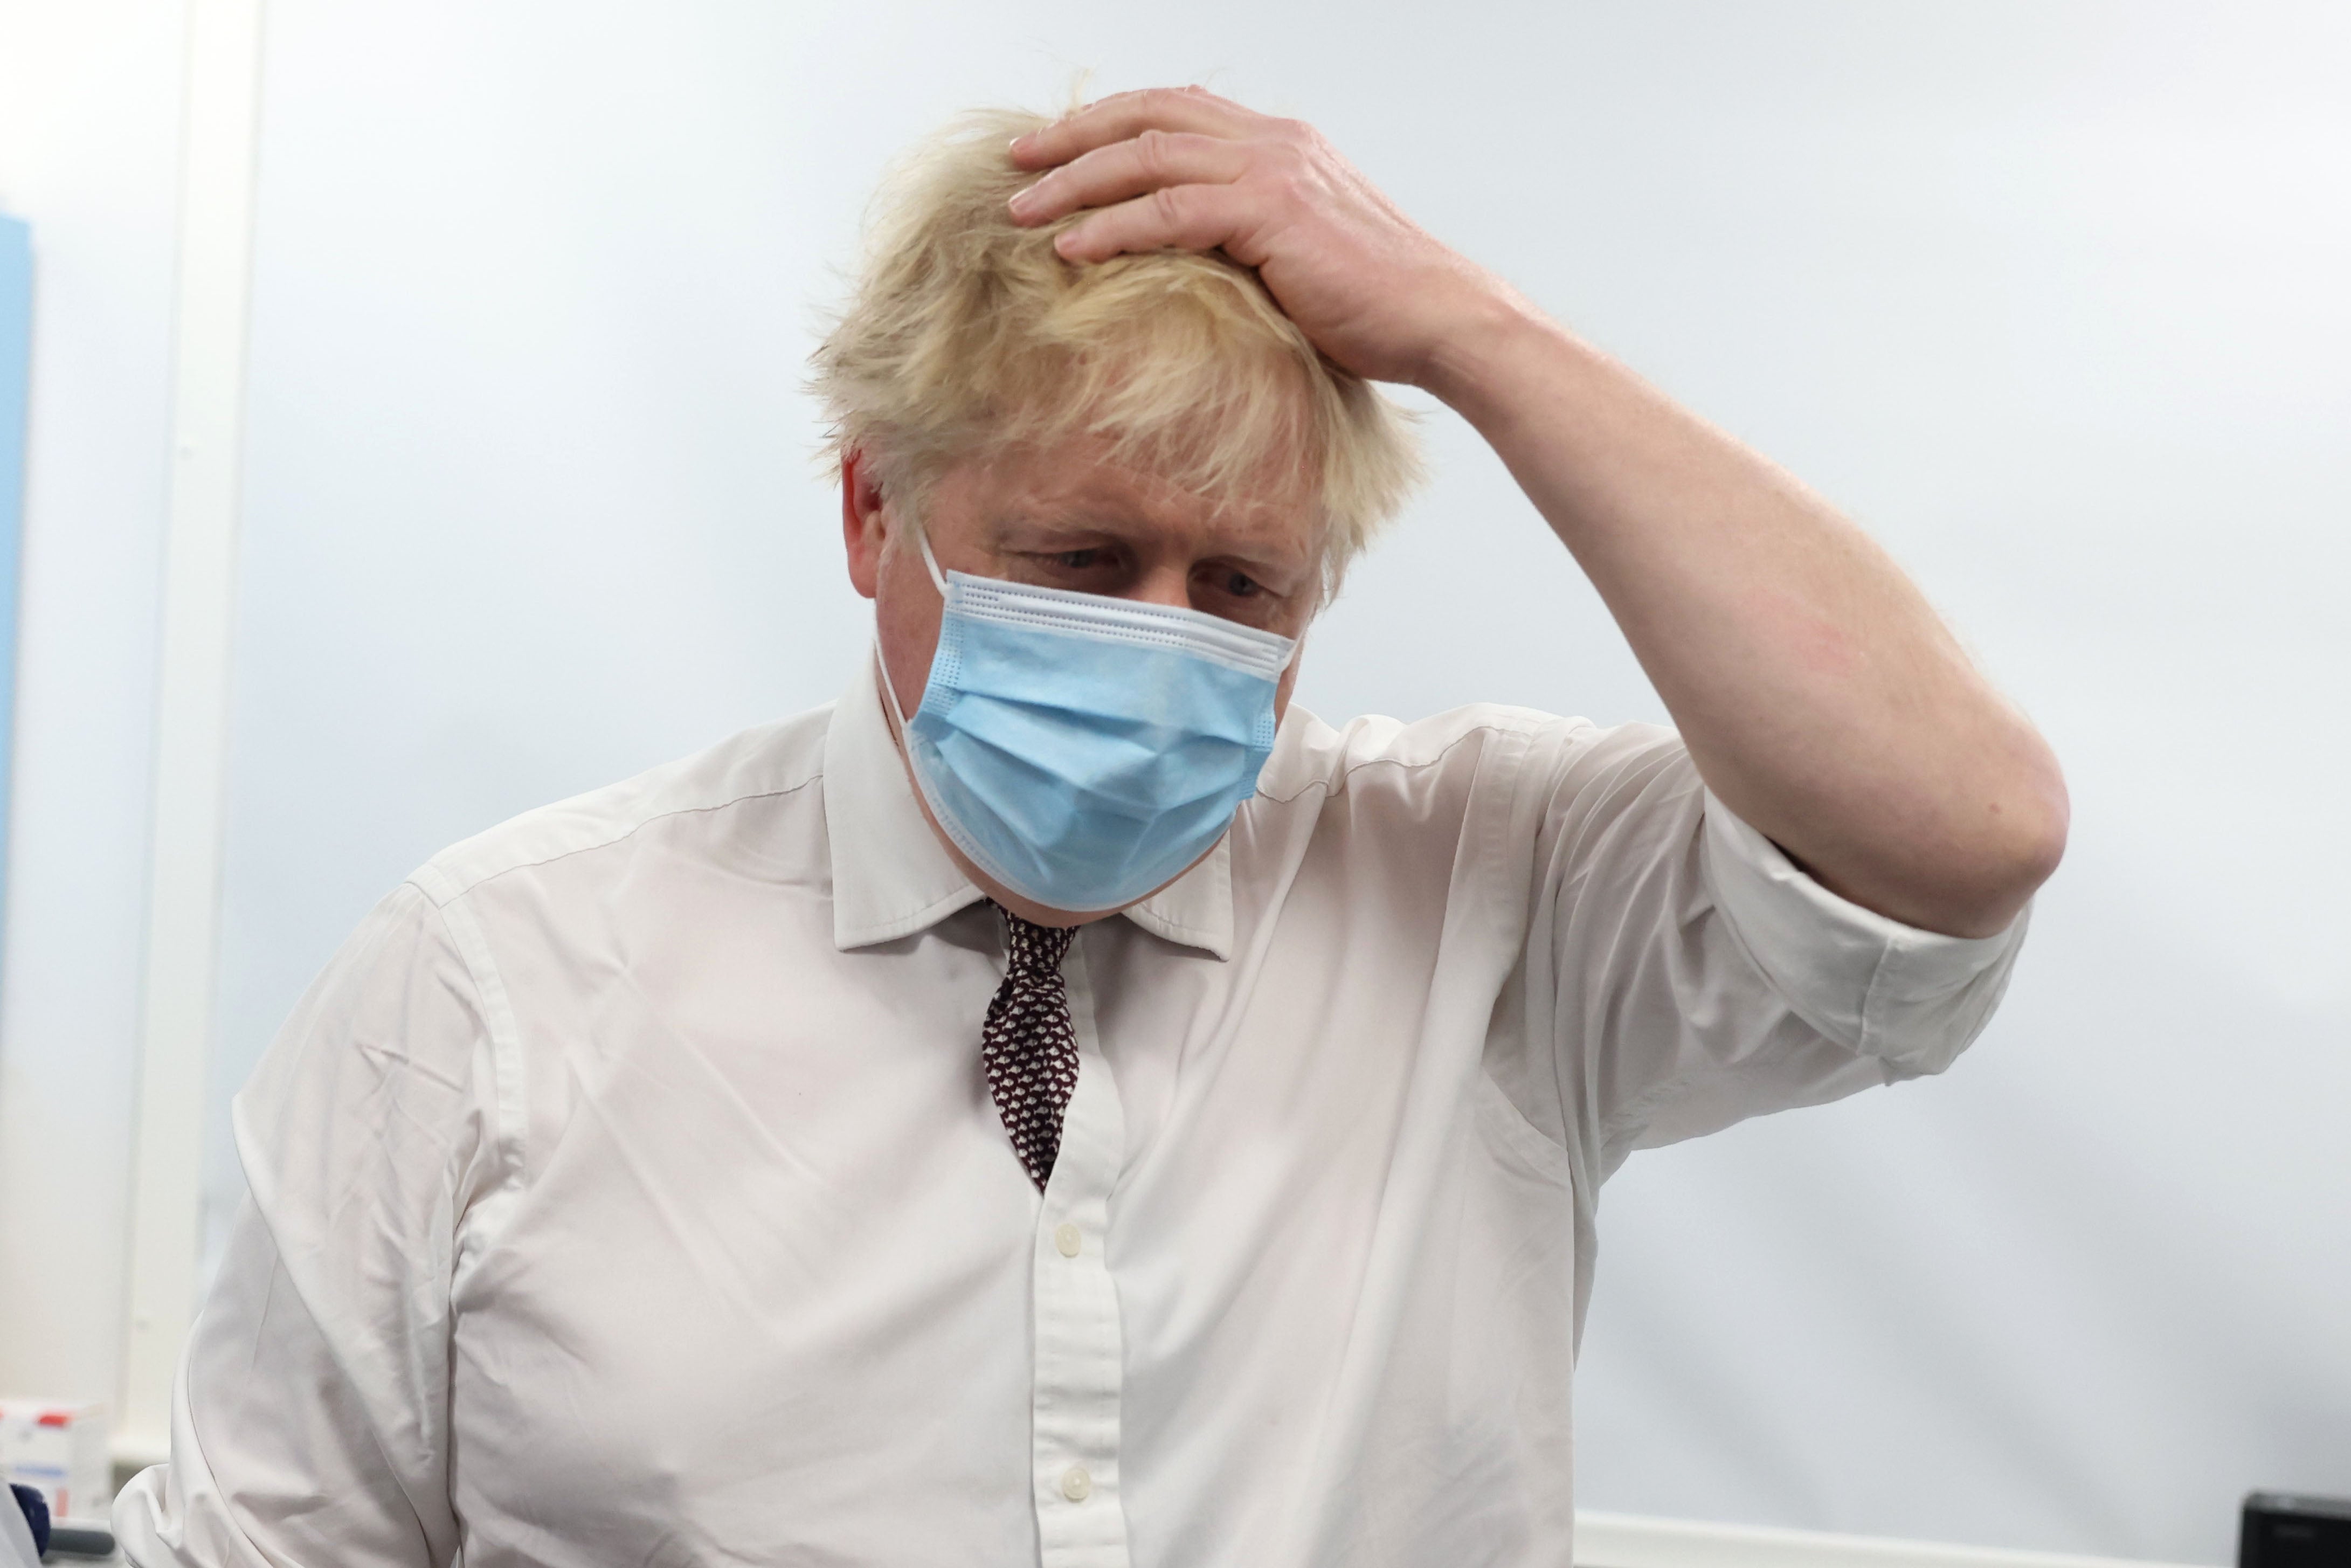 According to WhatsApp messages from the head of the civil service, which were read out at the Covid inquiry, Boris Johnson’s approach to the pandemic was ‘mad and dangerous’